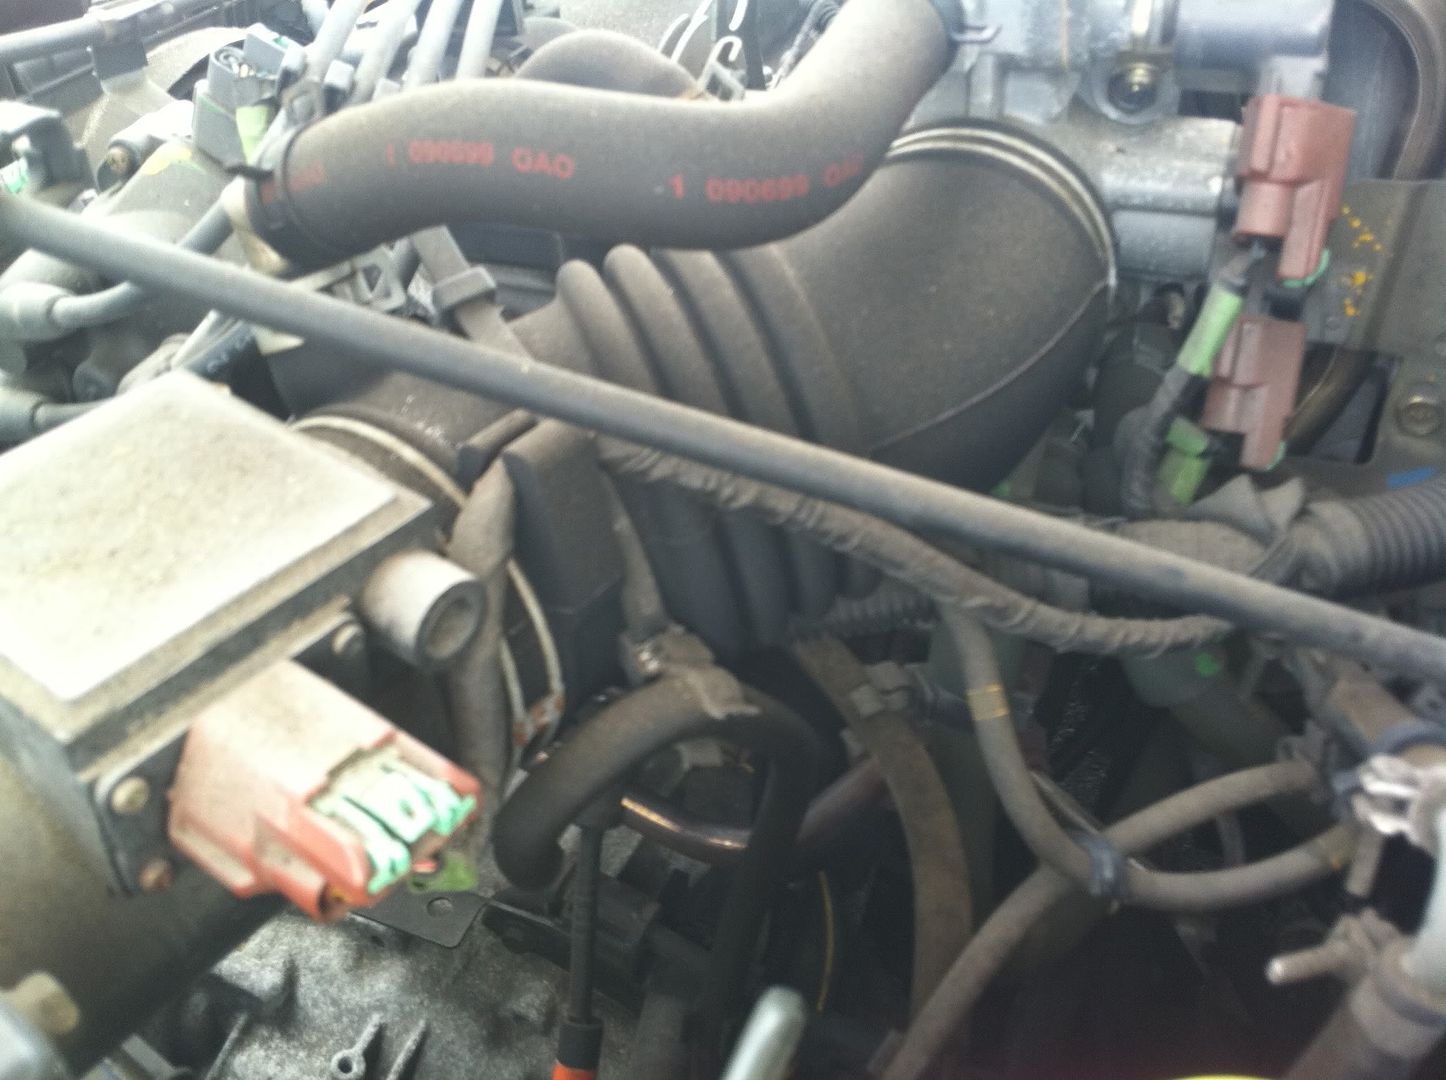 How to remove starter on 95 nissan altima